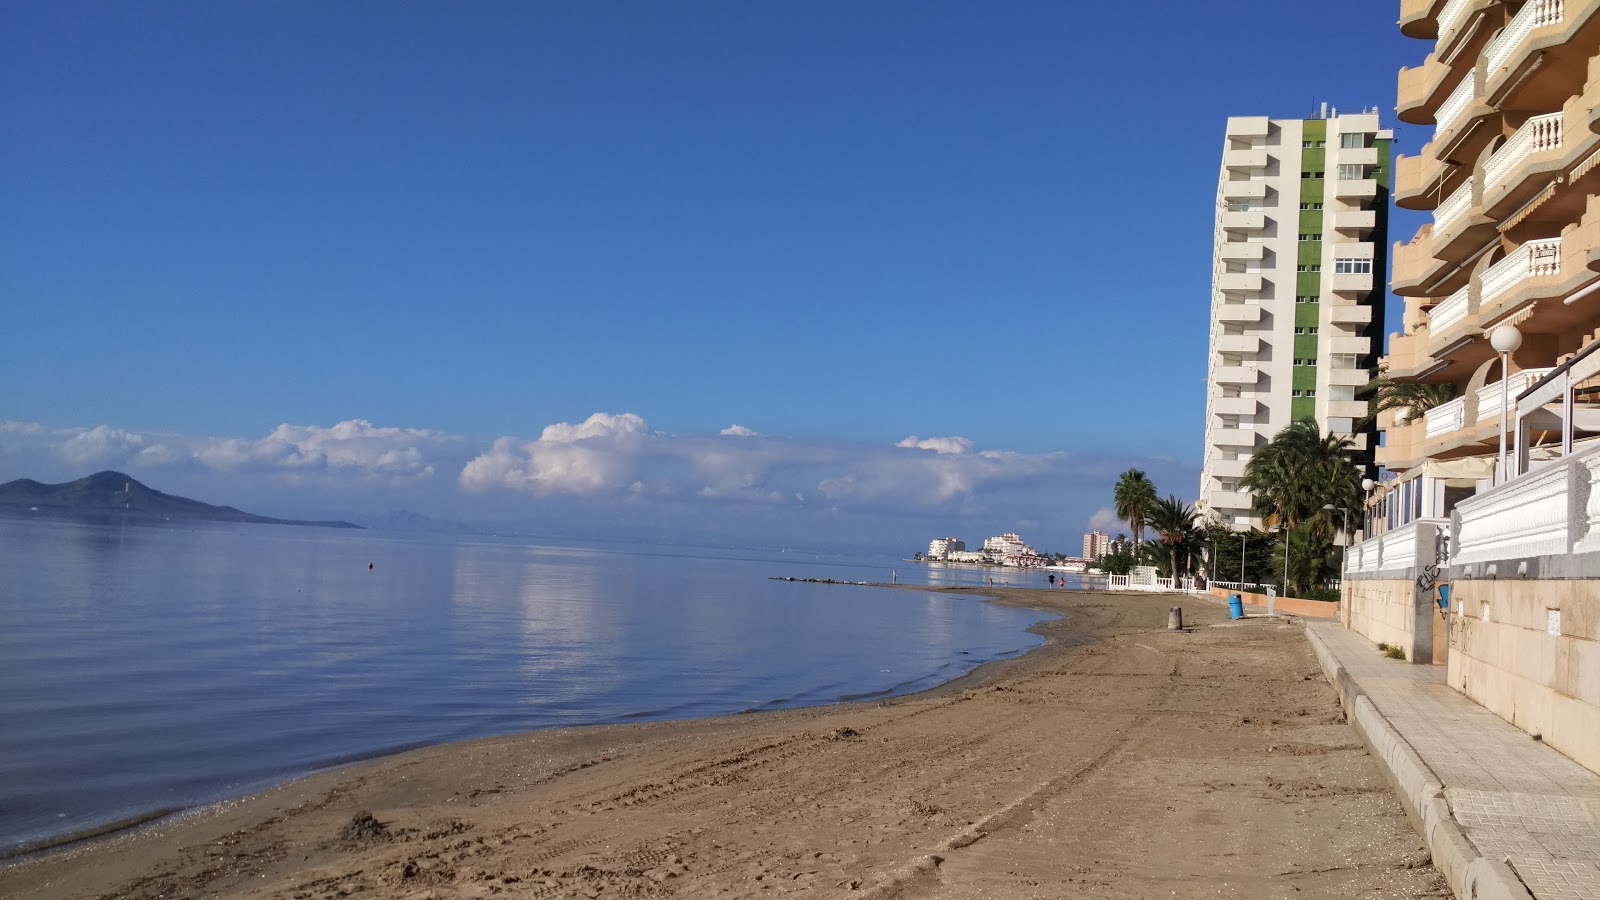 Photo of Playa del Galan 2 with blue water surface